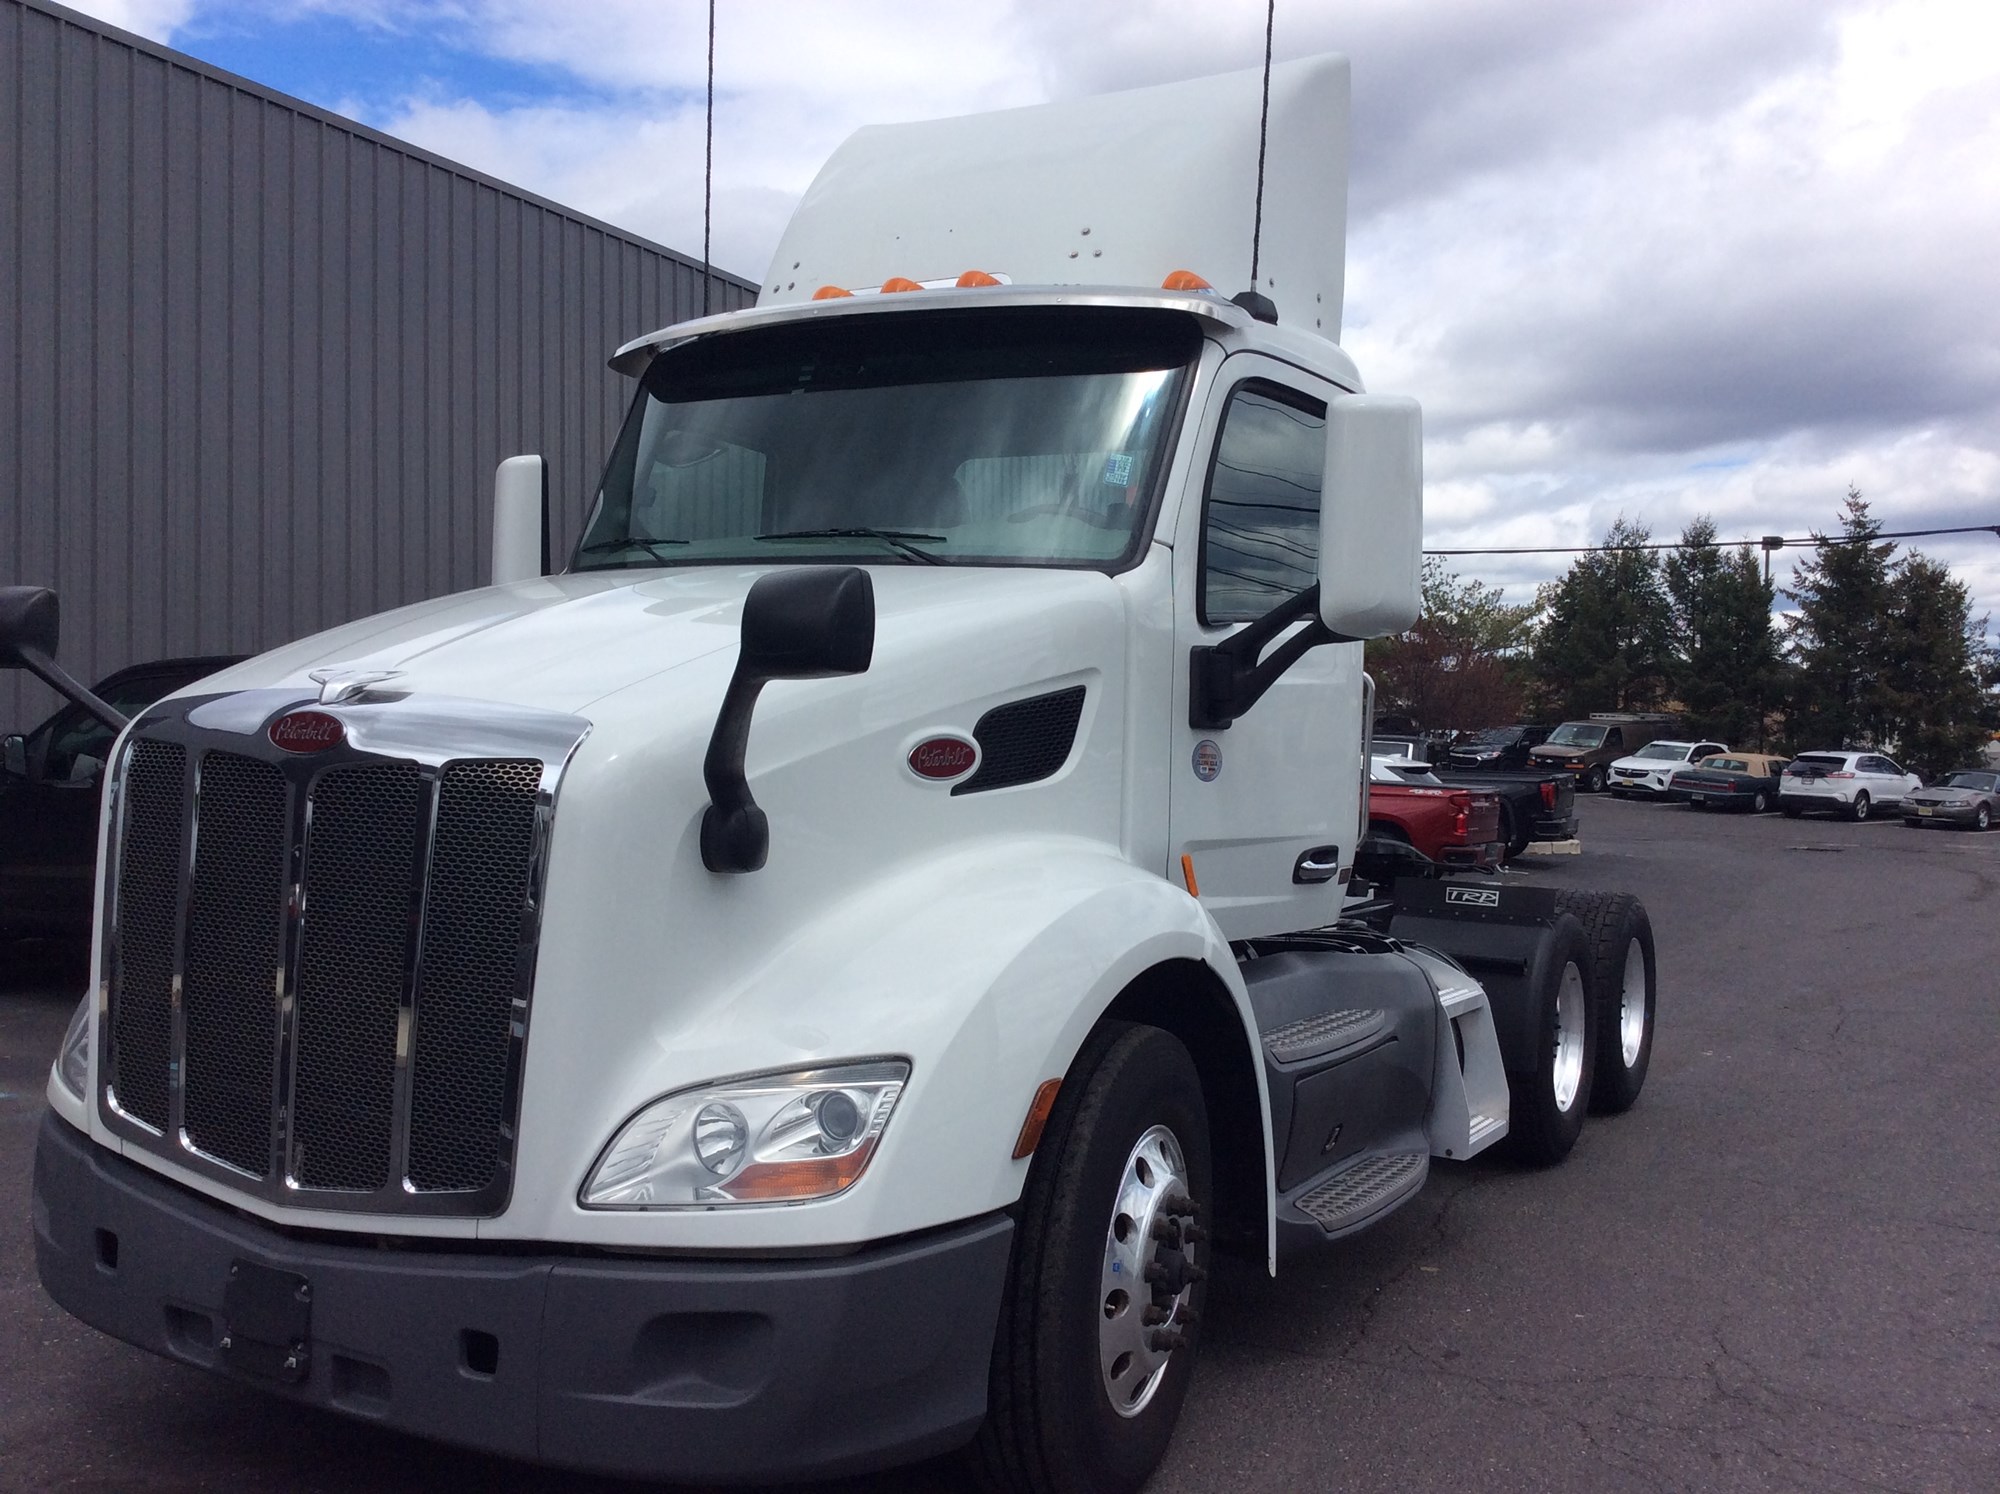 Used Truck Inventory - 1000350 01 - 92